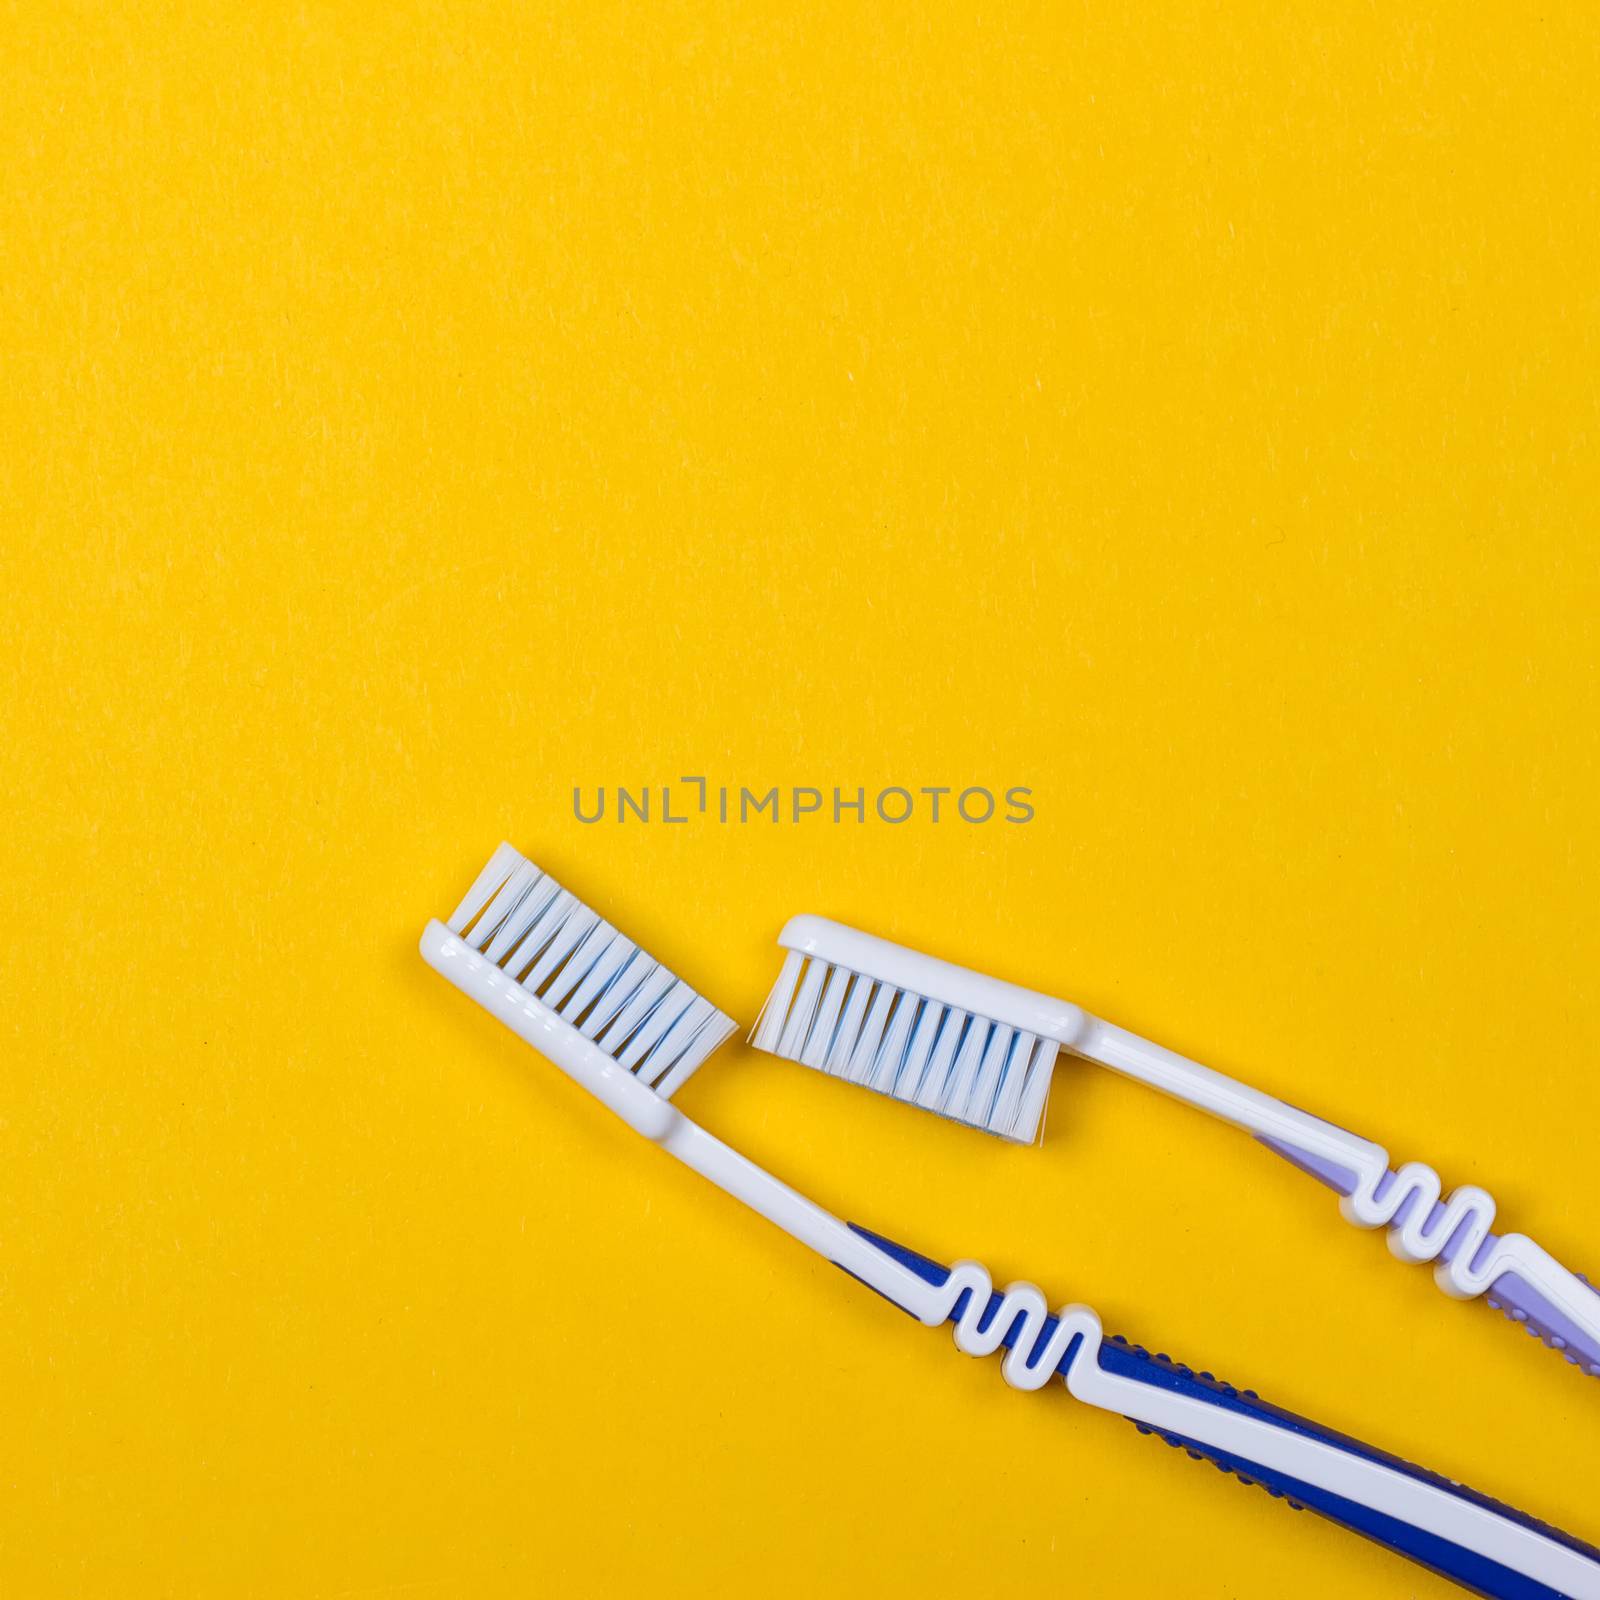 twi Toothbrushes on the yellow background. Top view